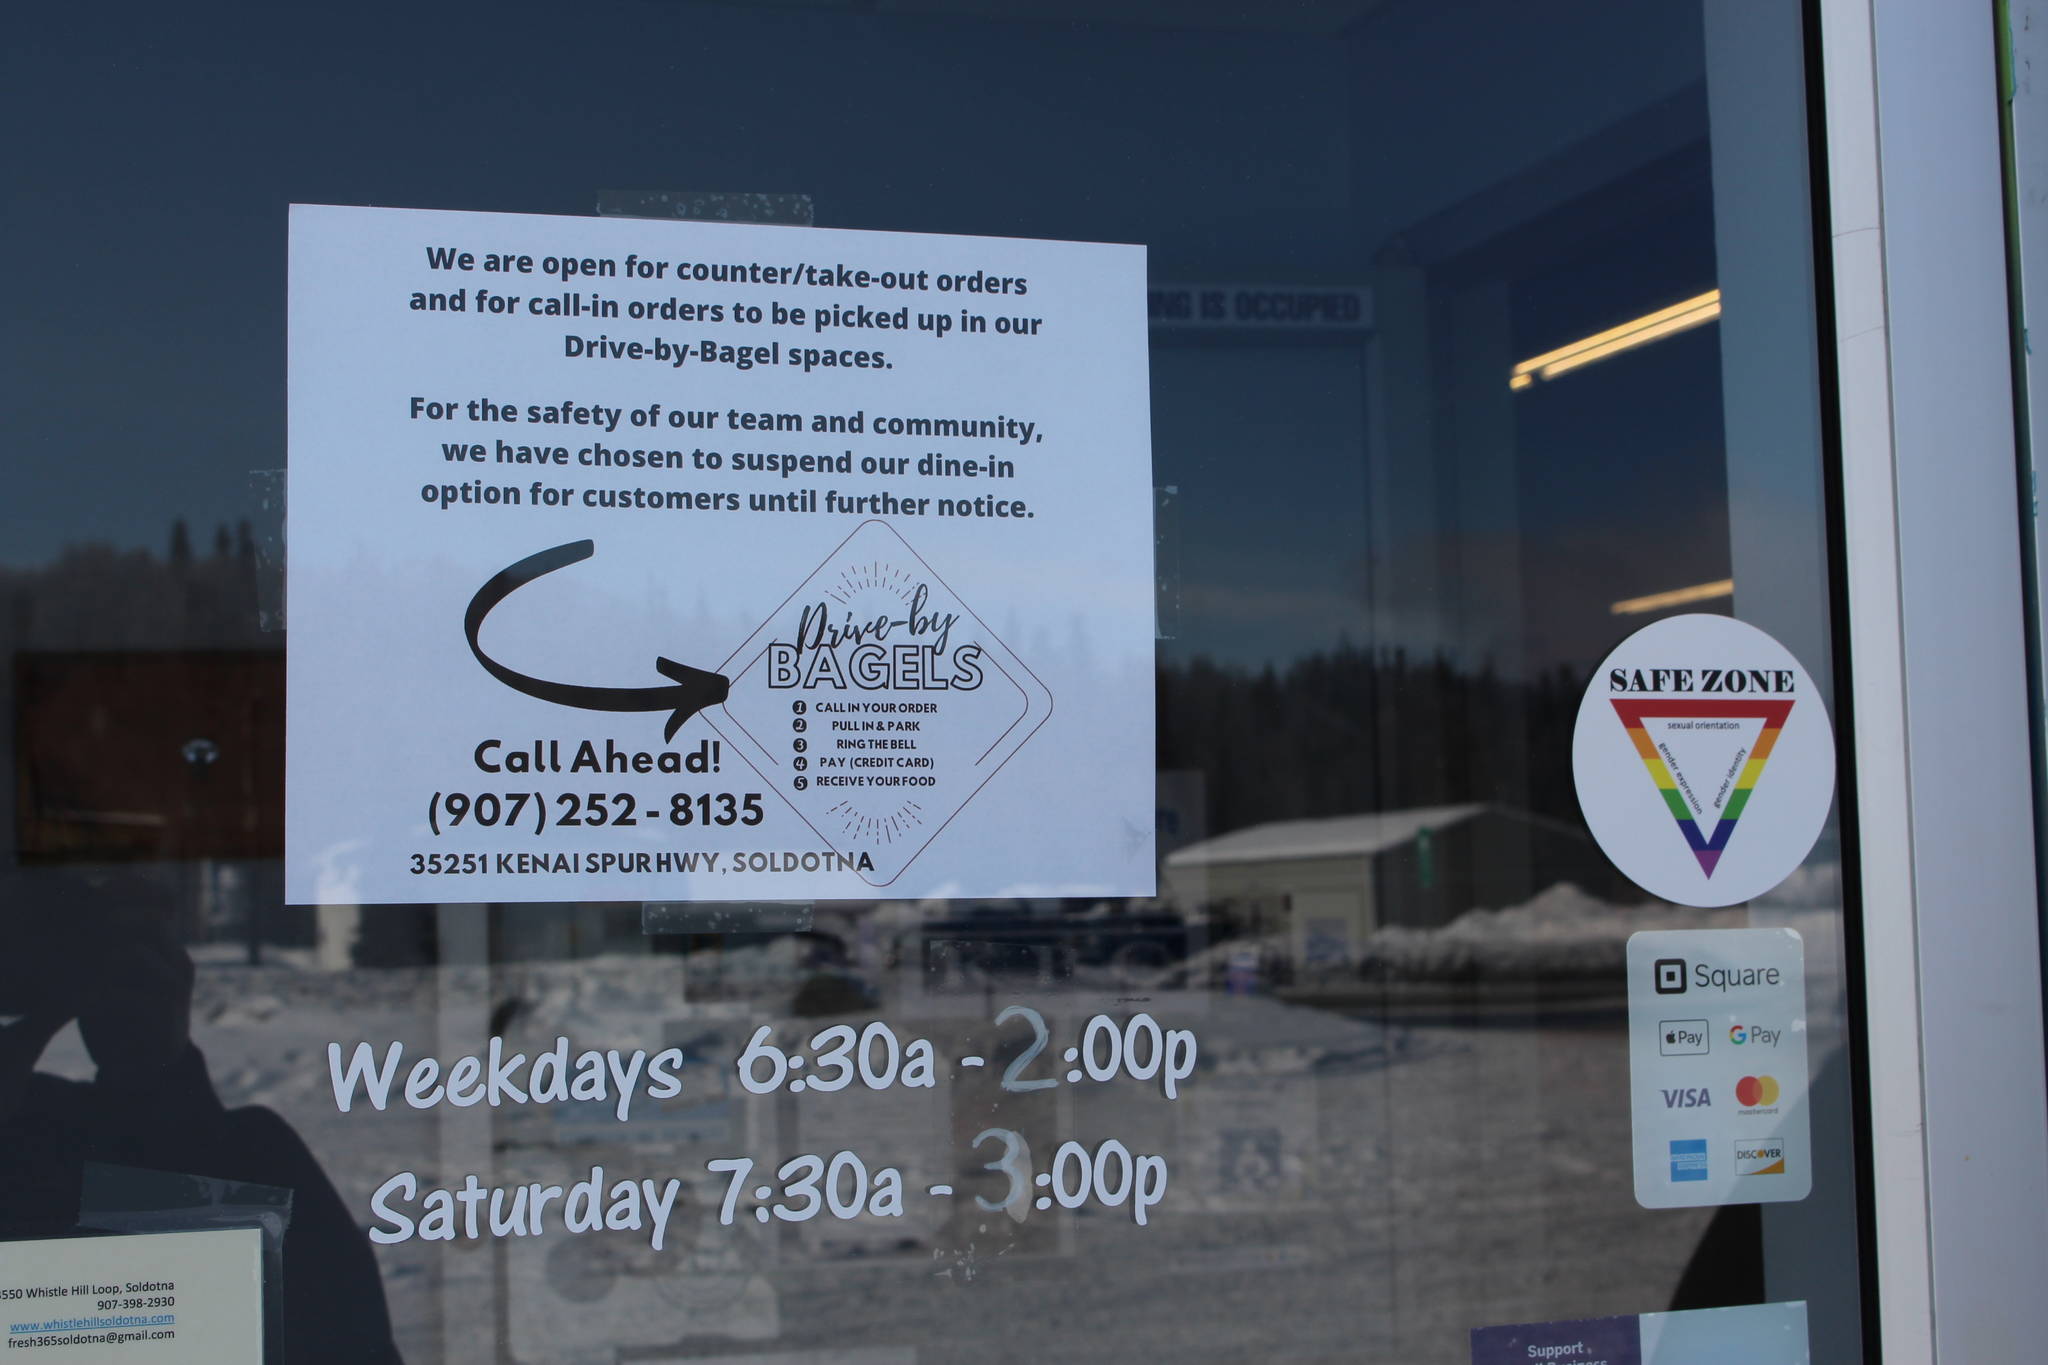 A sign detailing the modified services offered by Everything Bagels can be seen here in Soldotna, Alaska, on March 18, 2020. (Photo by Brian Mazurek/Peninsula Clarion)